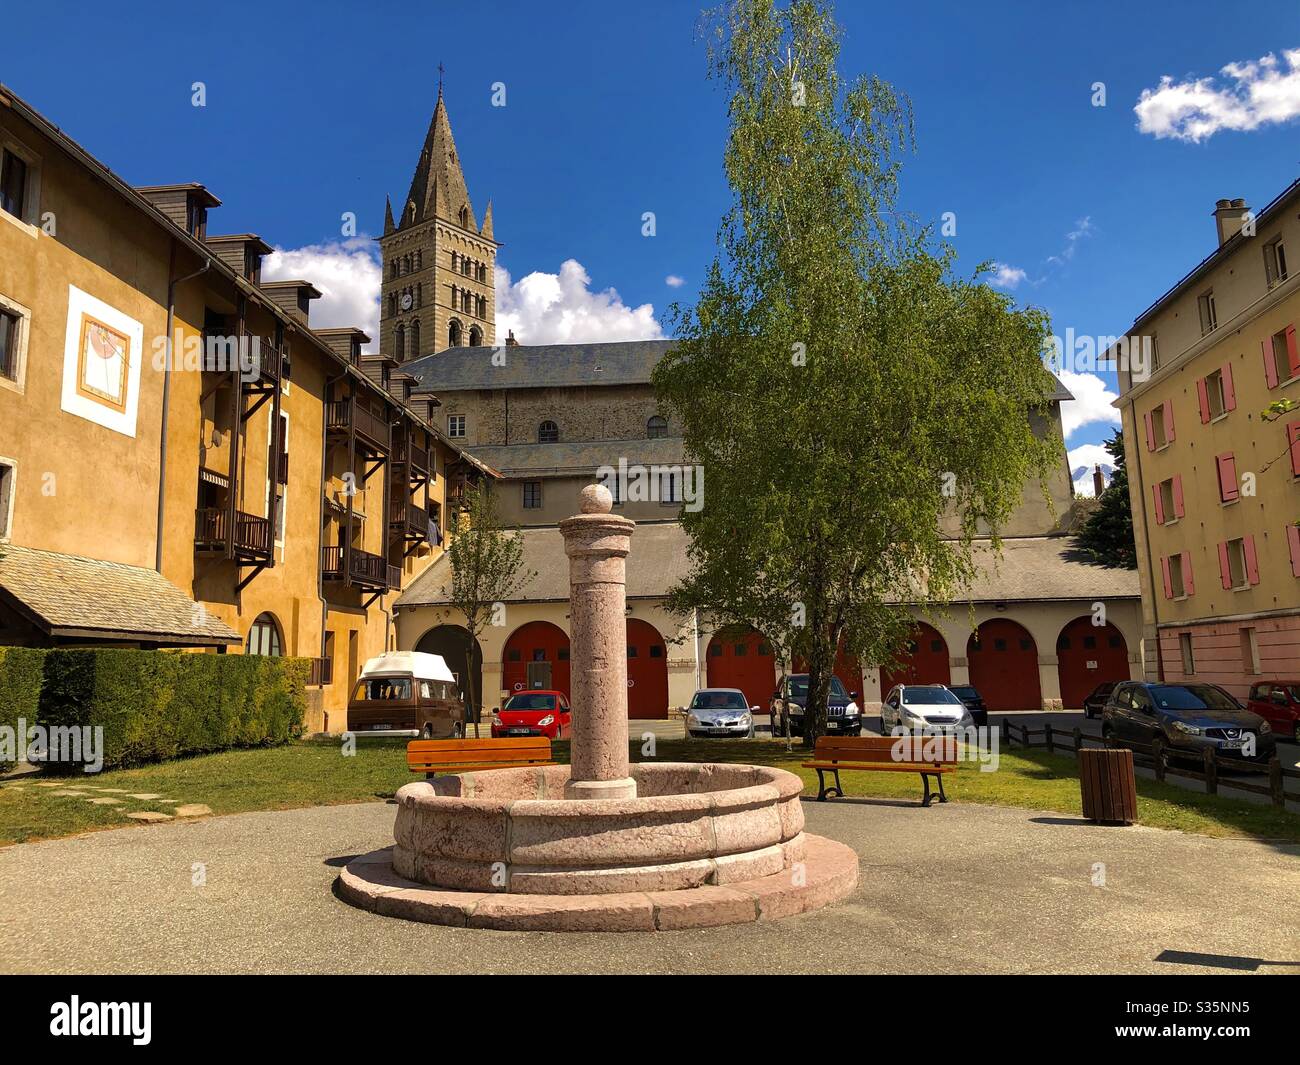 Confinement, Embrun, France, street view Stock Photo